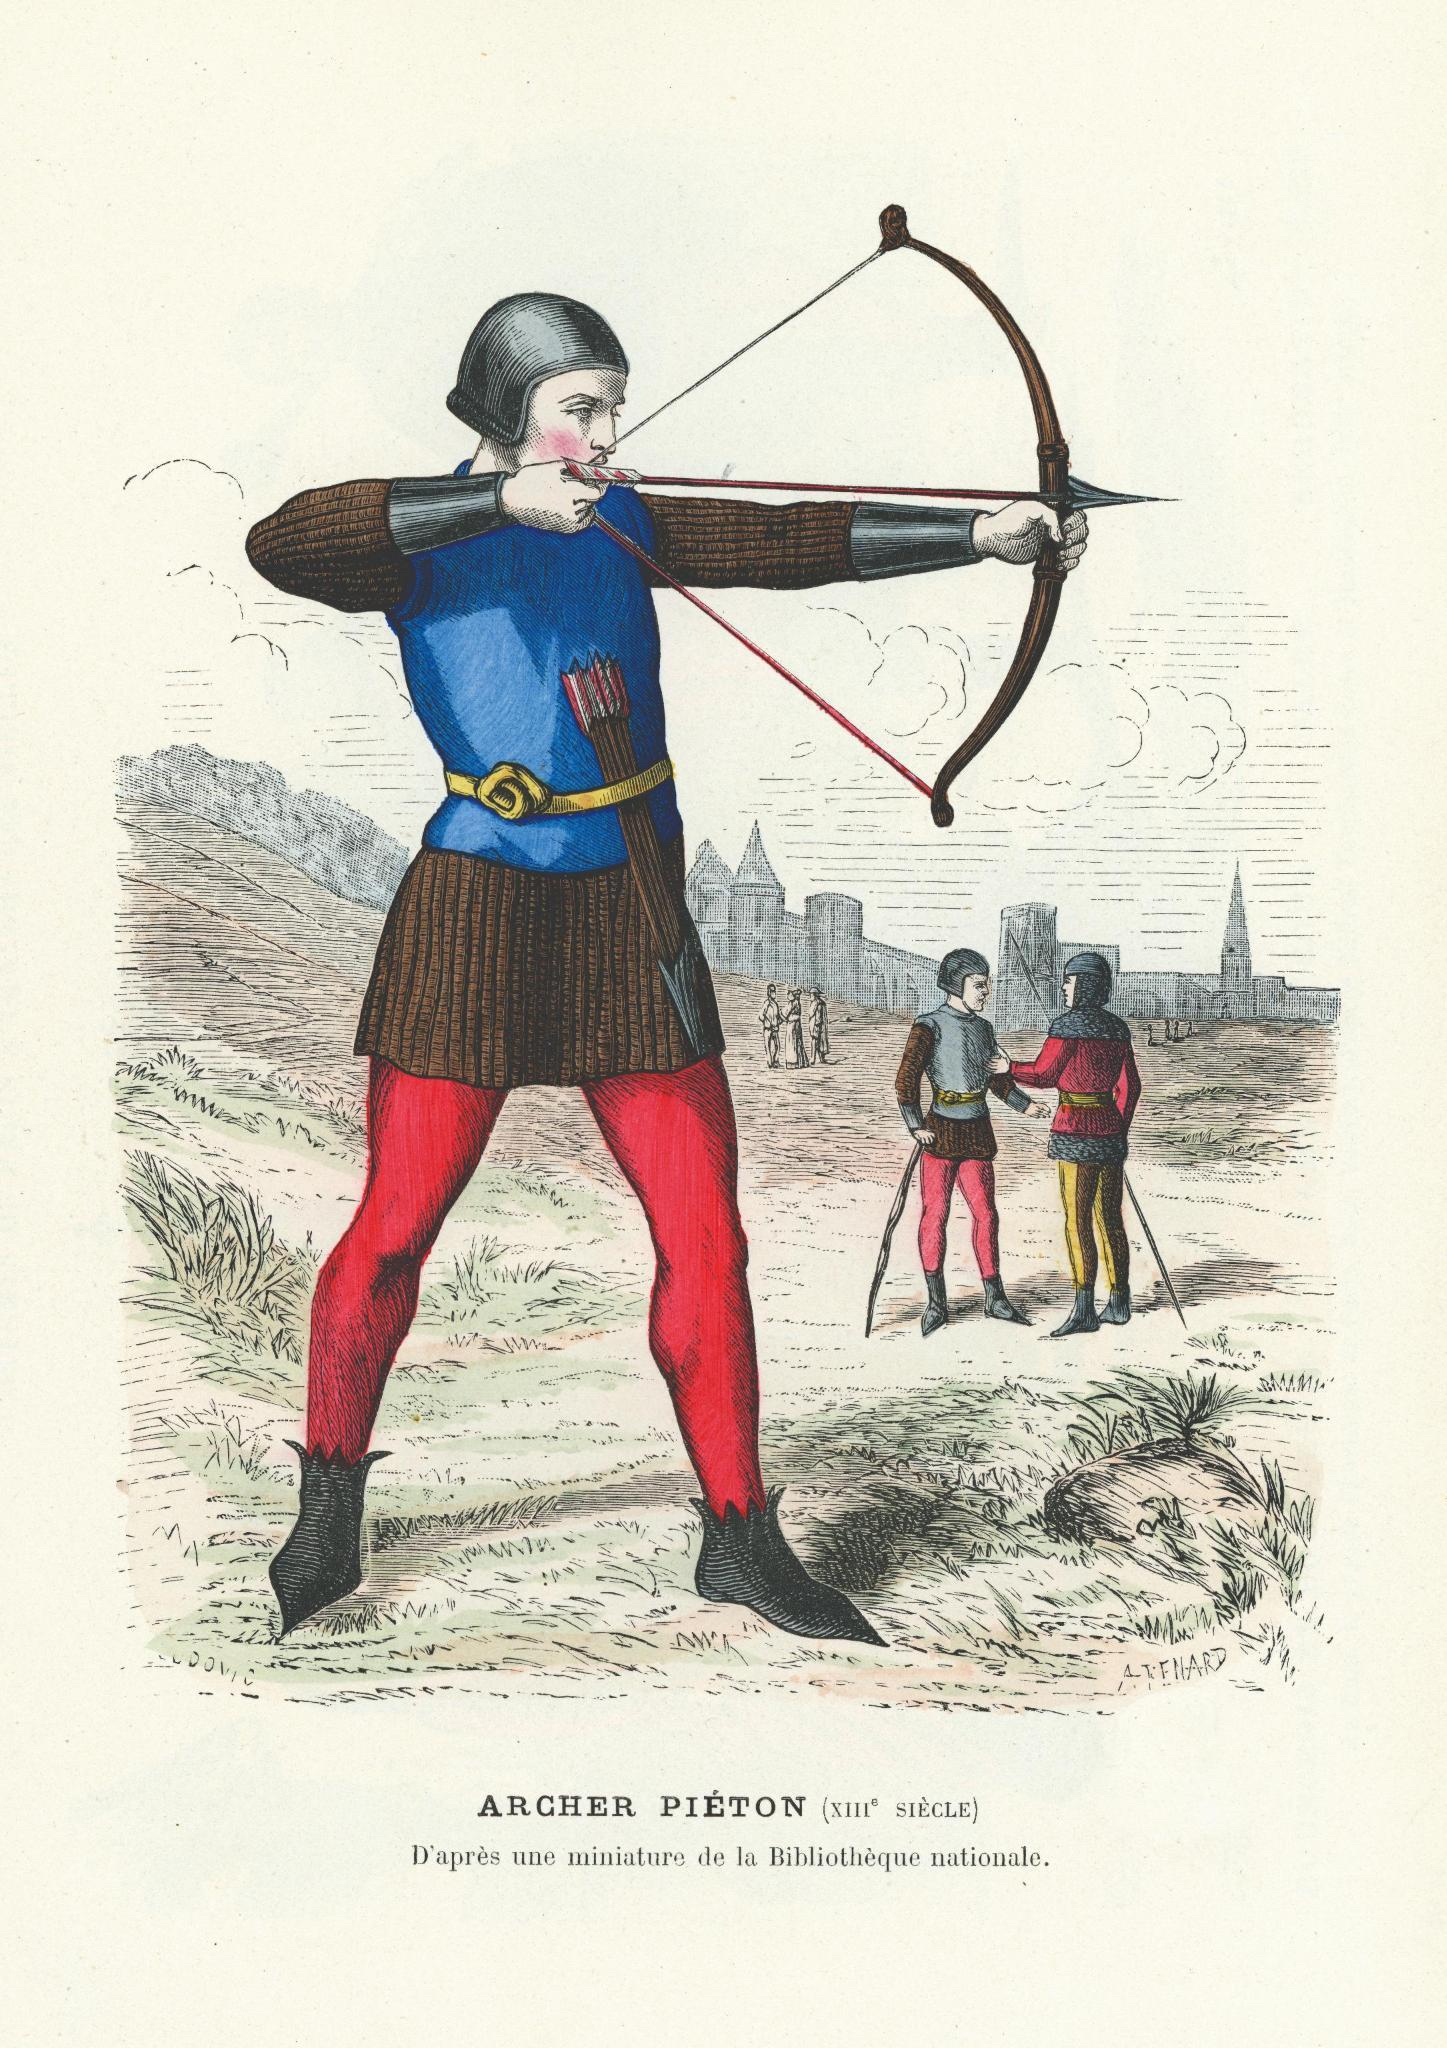 Vintage color engraving of an archer, France, 13th century.